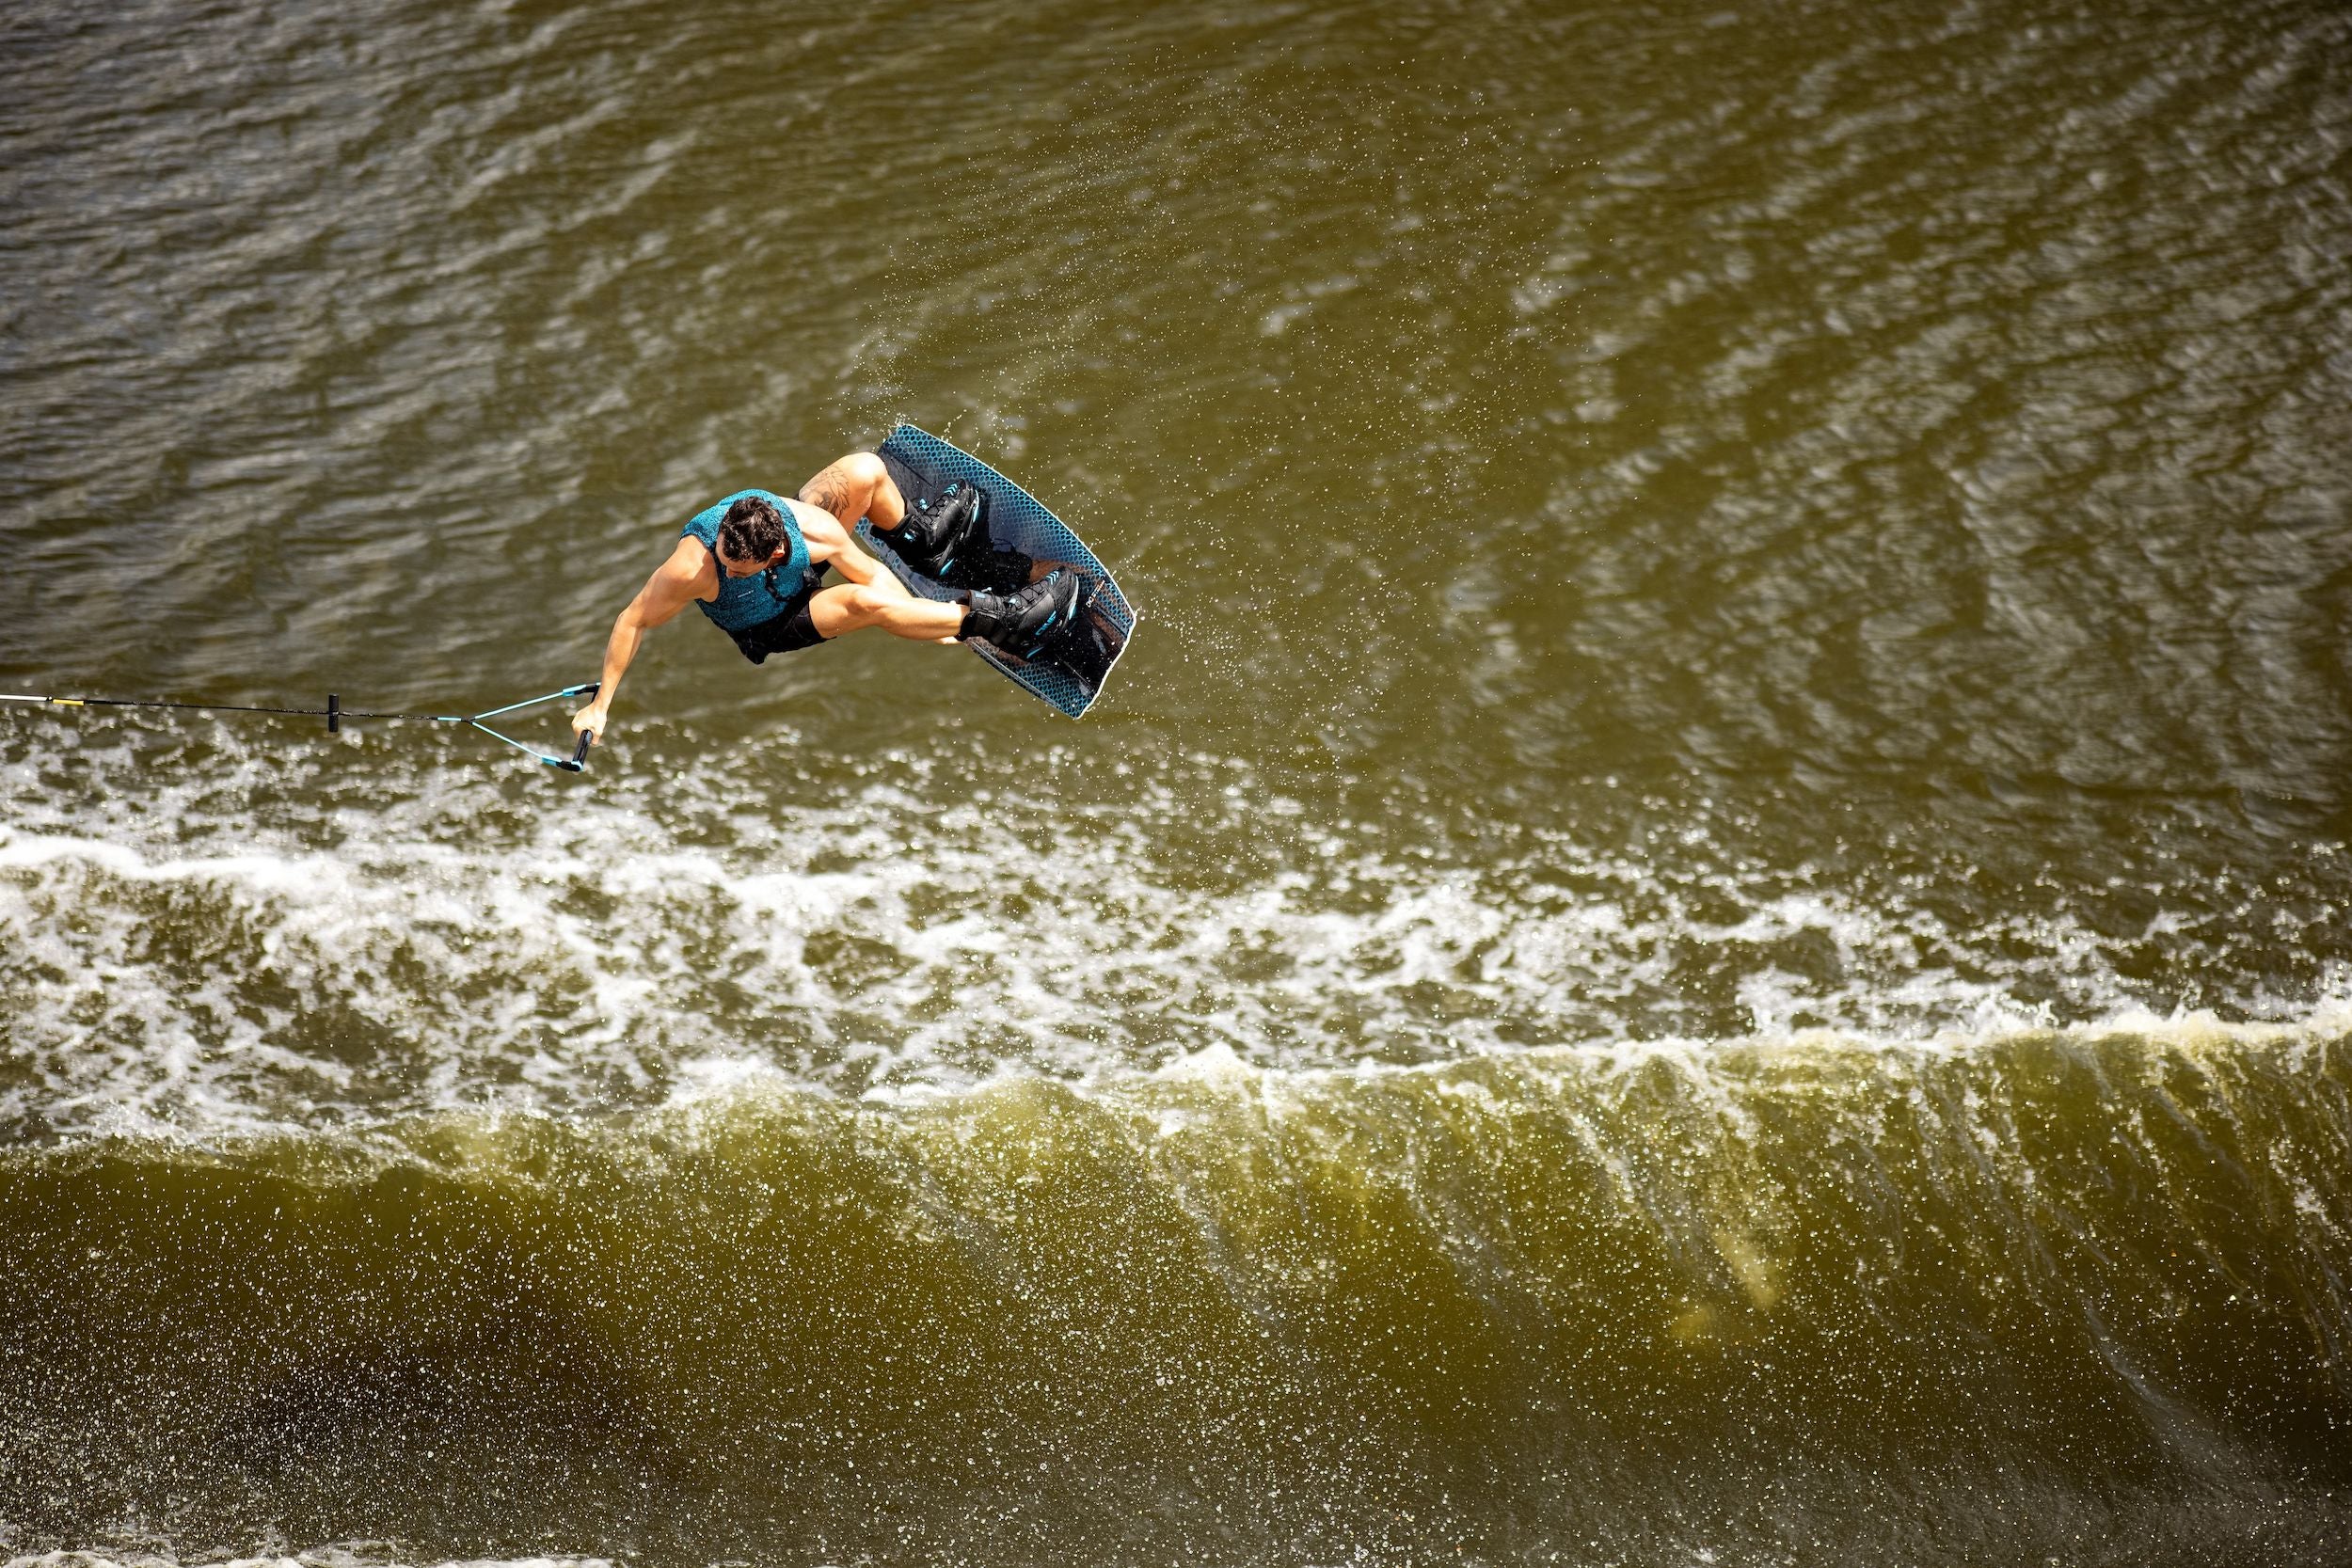 A person in the air performing a trick on a surfboard with Ronix 2023 One Carbitex Boots.